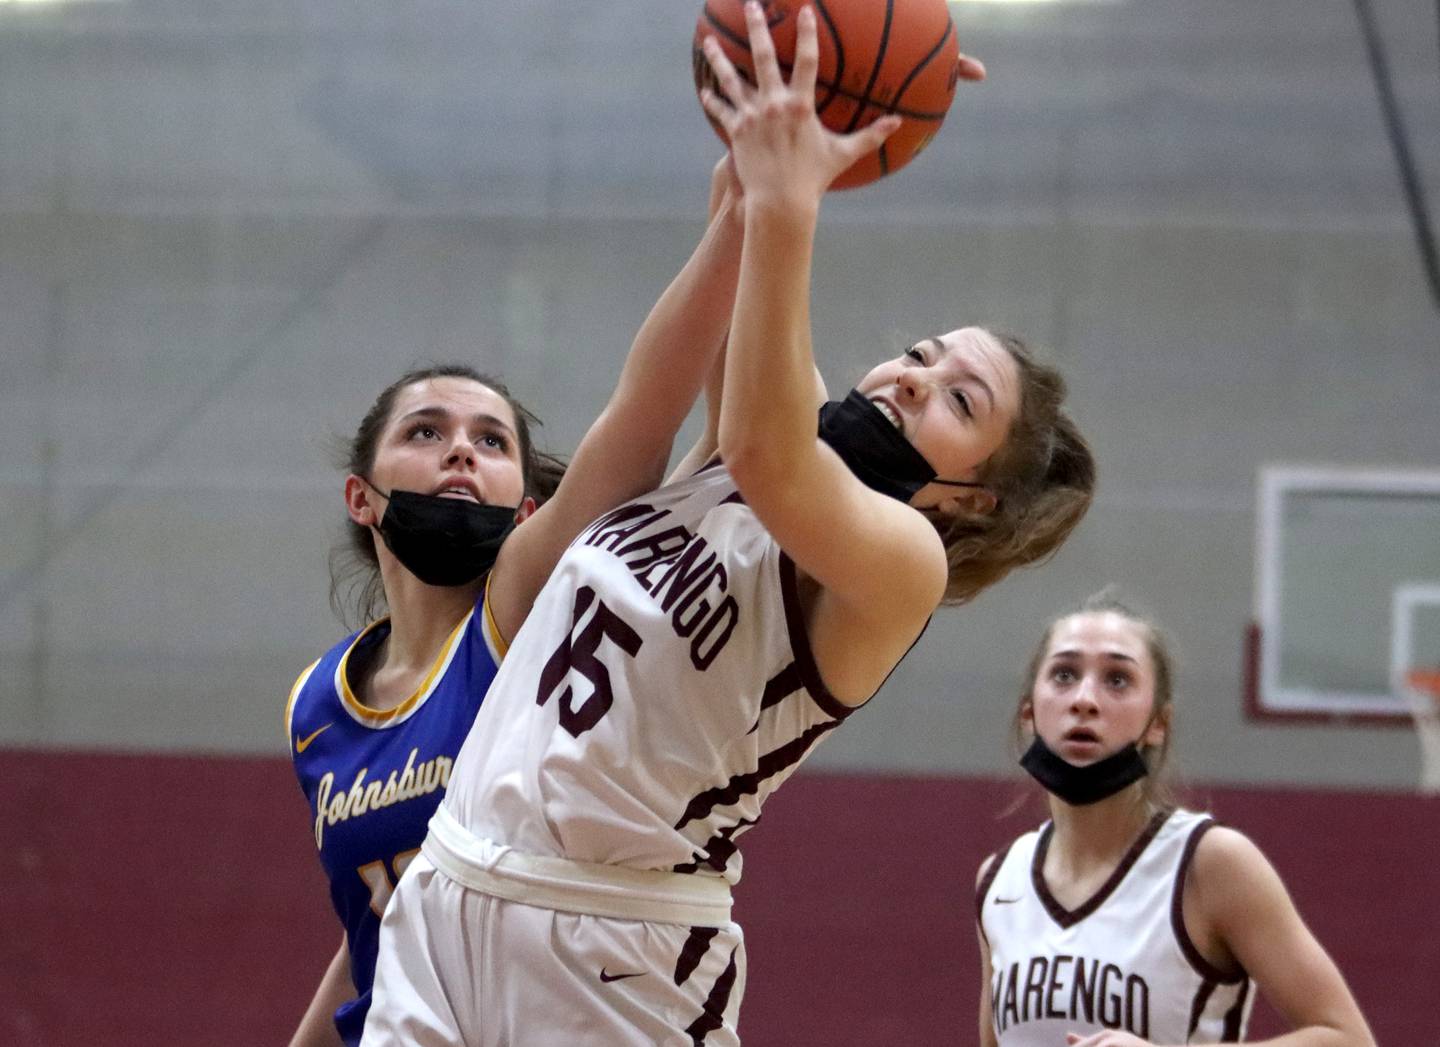 Marengo’s Gianna Almeida, front, and Johnsburg’s Macy Madsen, left, battle for a rebound during girls varsity basketball action in Marengo Thursday night. Marengo’s Emily Kirchhoff, right, keeps an eye on the action.